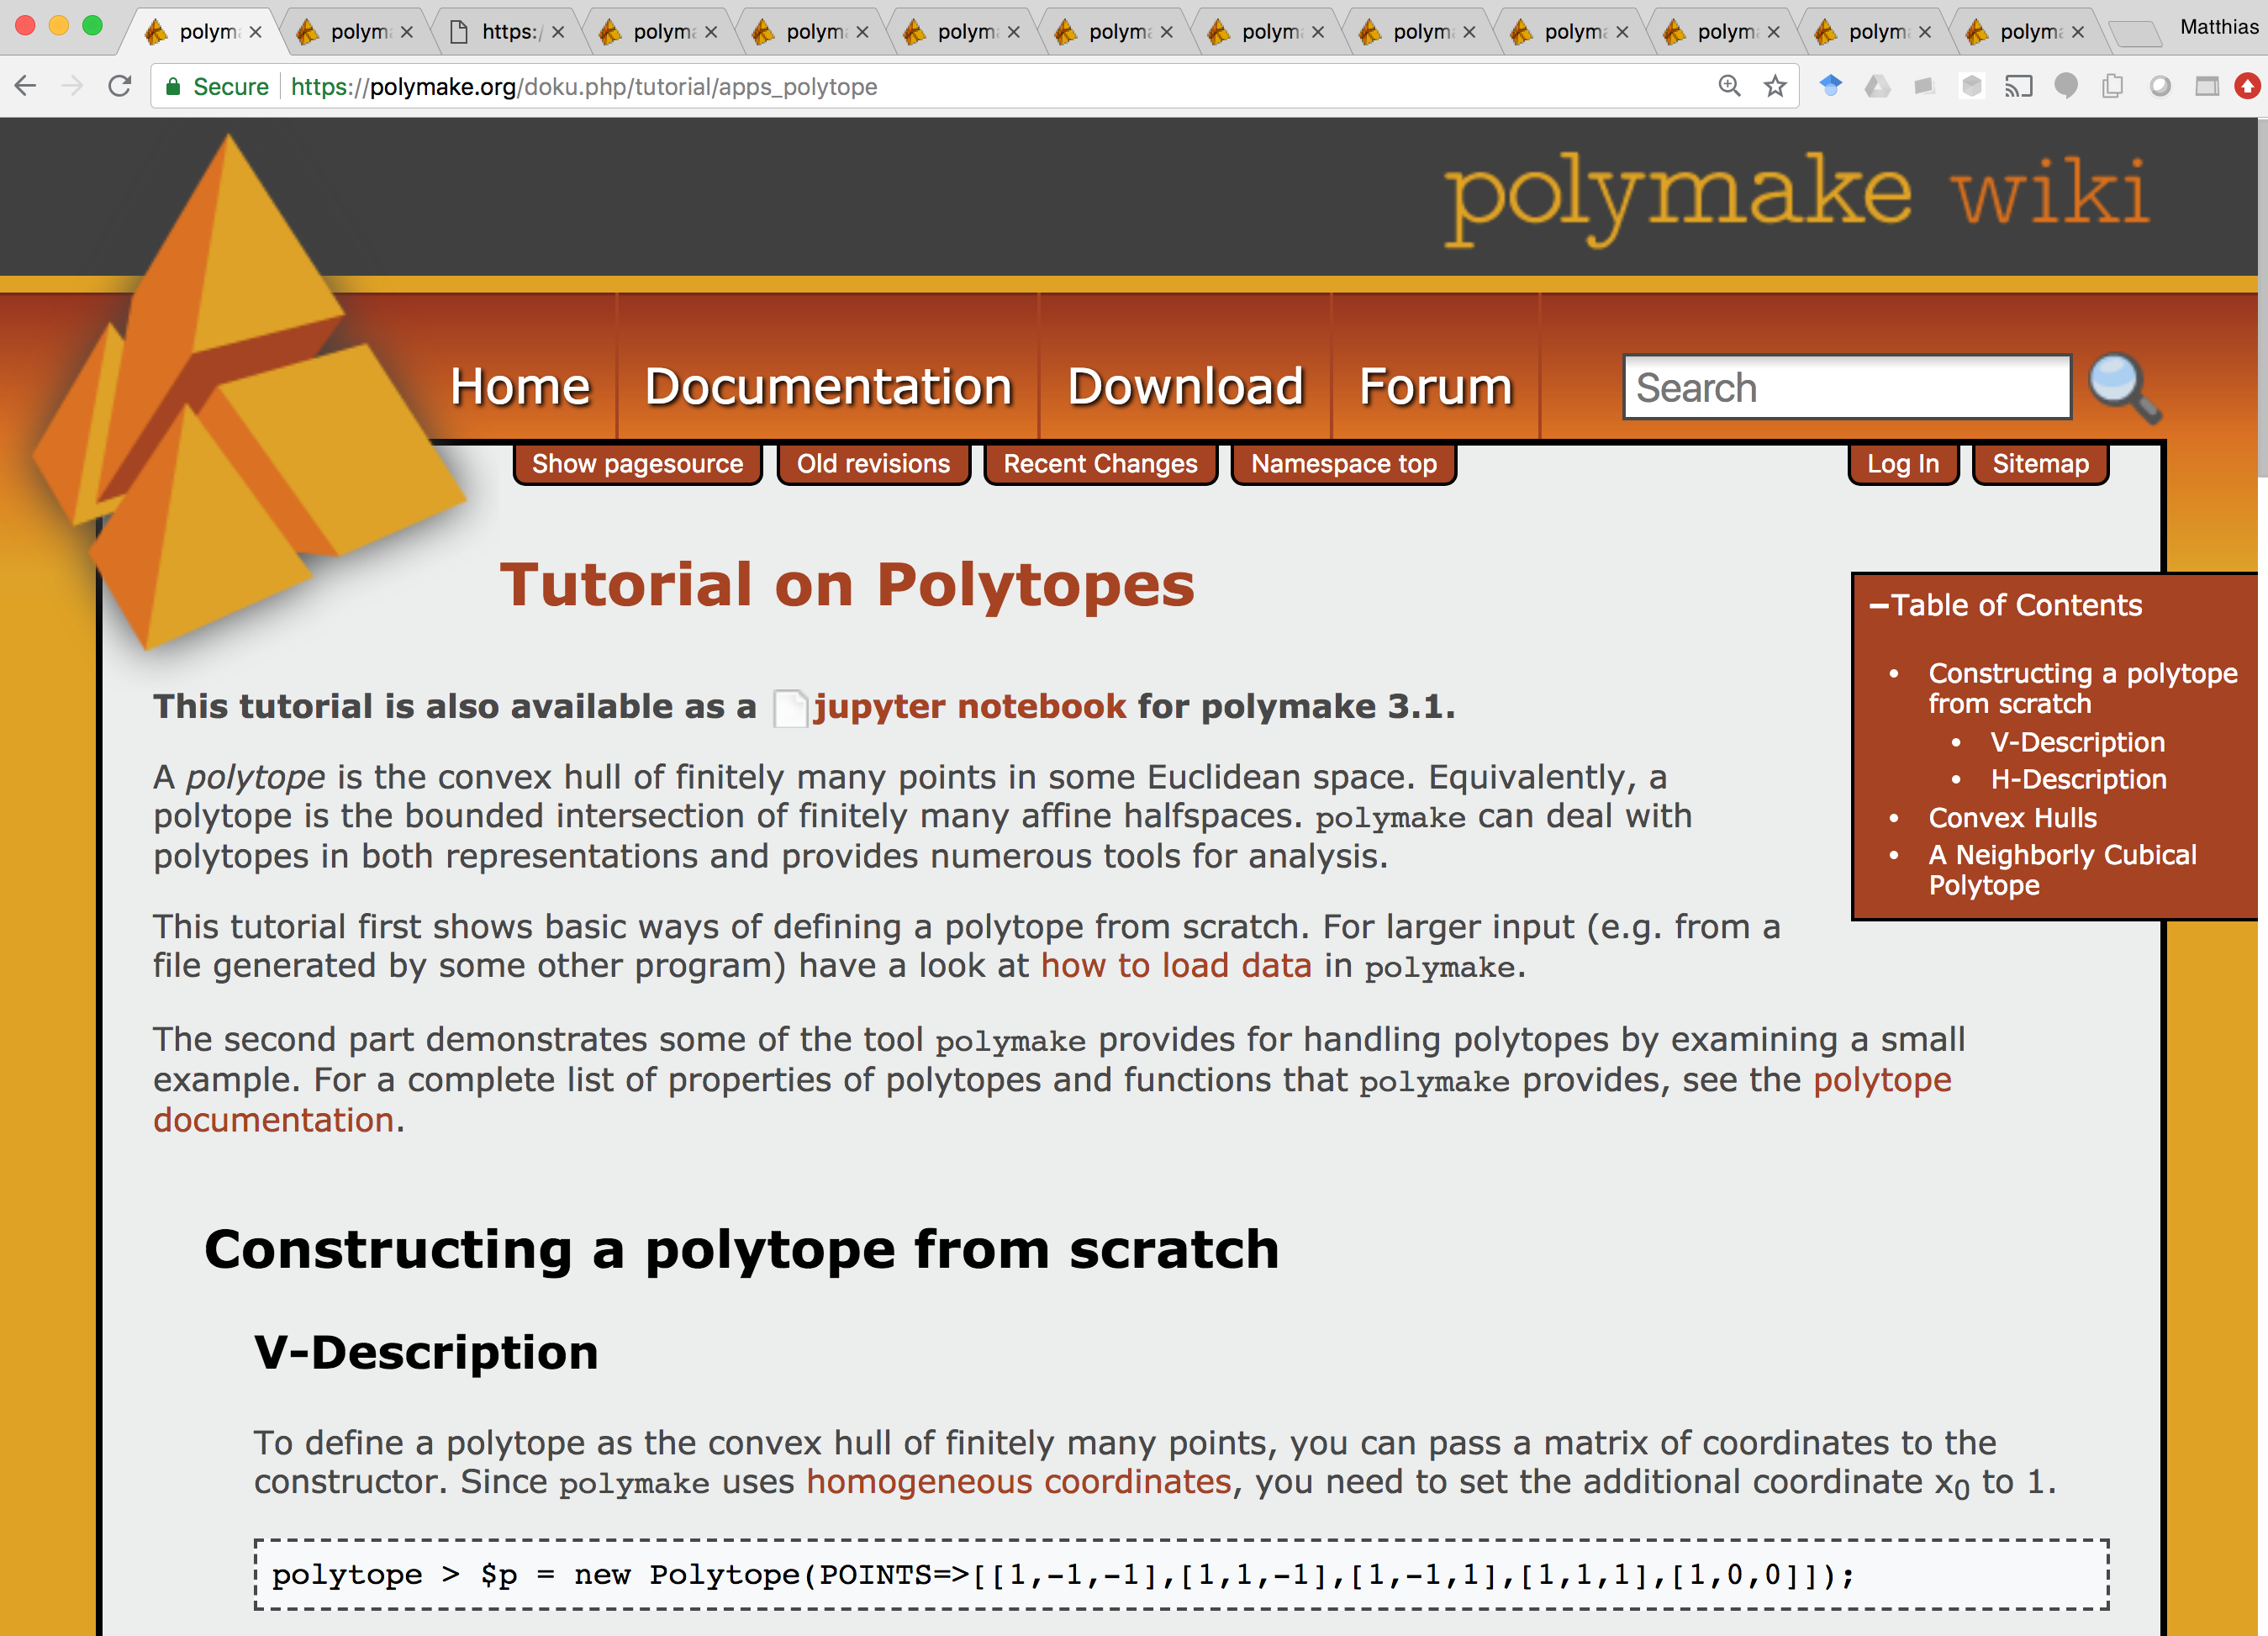 _images/polymake-tutorial-polytopes.png